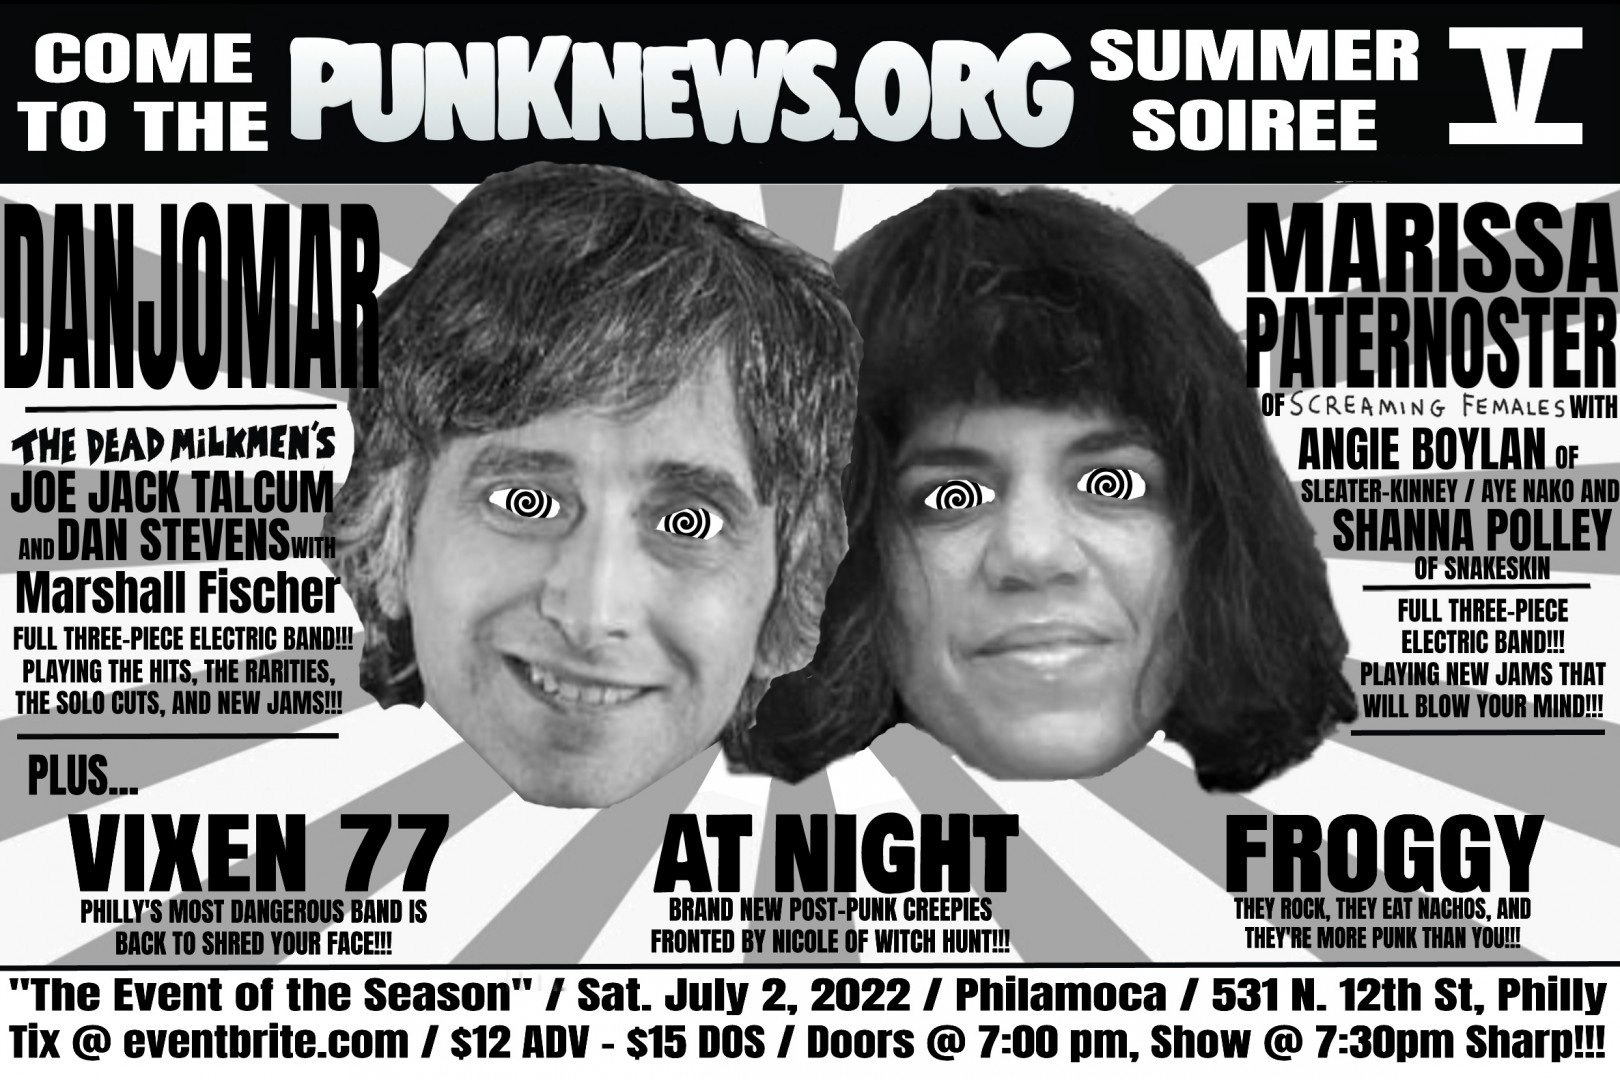 DanJoMar and Marissa Paternoster to co-headline Summer Soiree 5 in Philly on July 2!!!